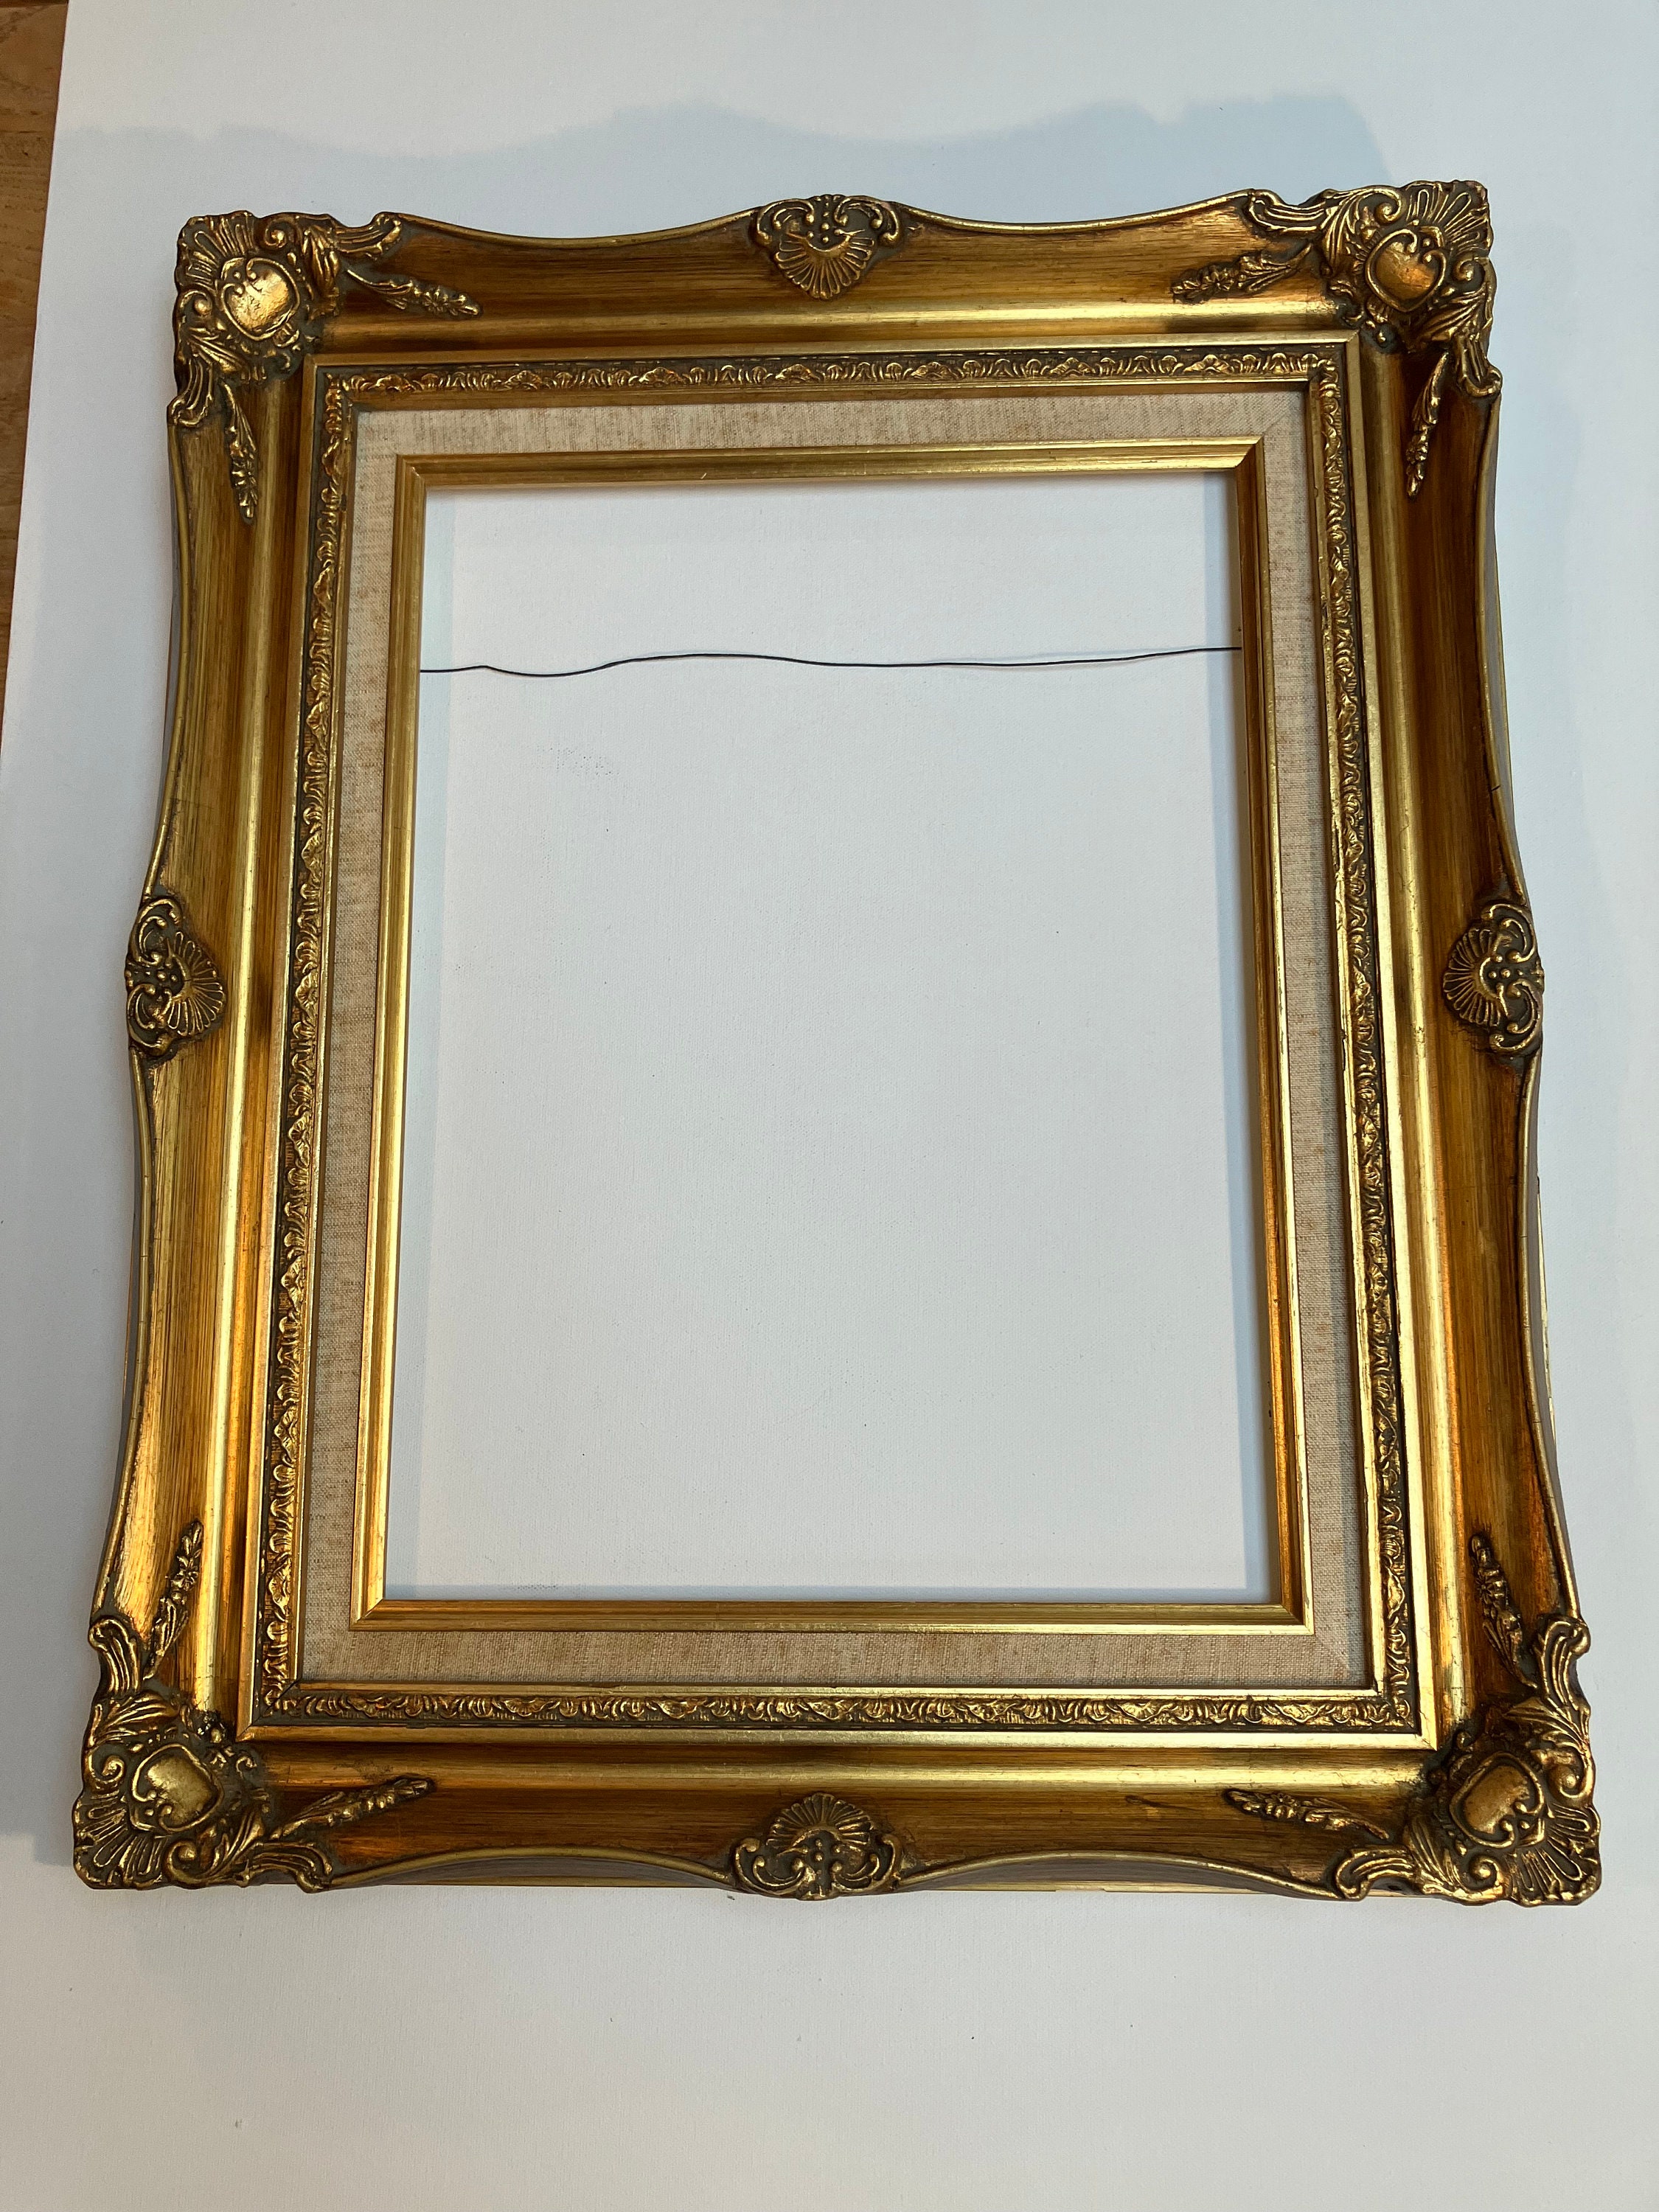 ArtToFrames 24x30 inch Gold with beads Wood Picture Frame, WOMD10051-24x30